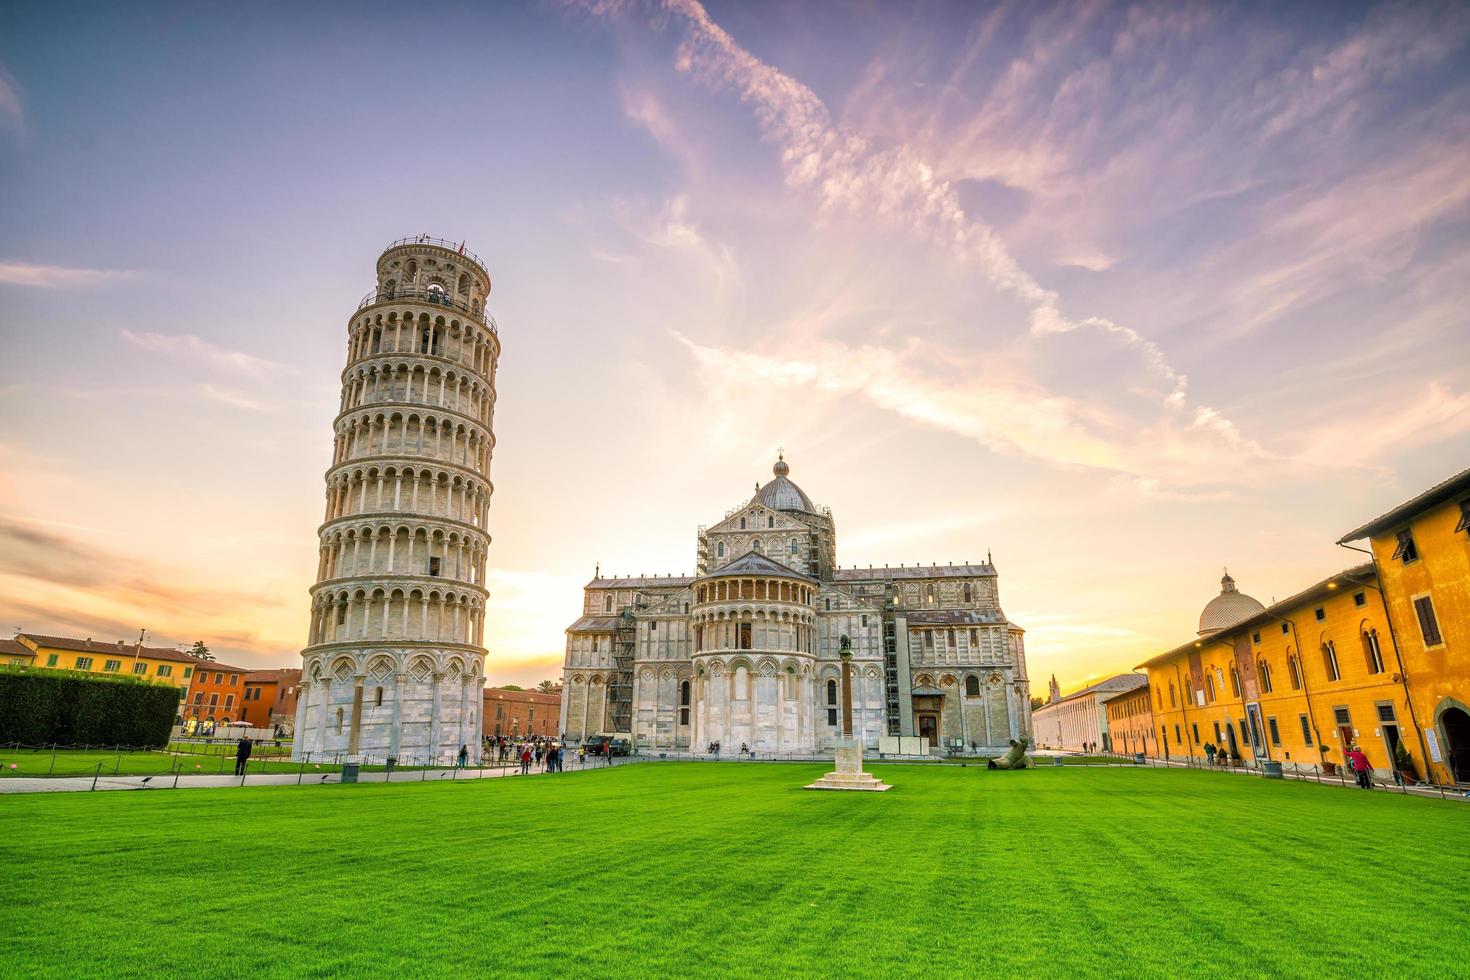 Pisa Cathedral and the Leaning Tower photo